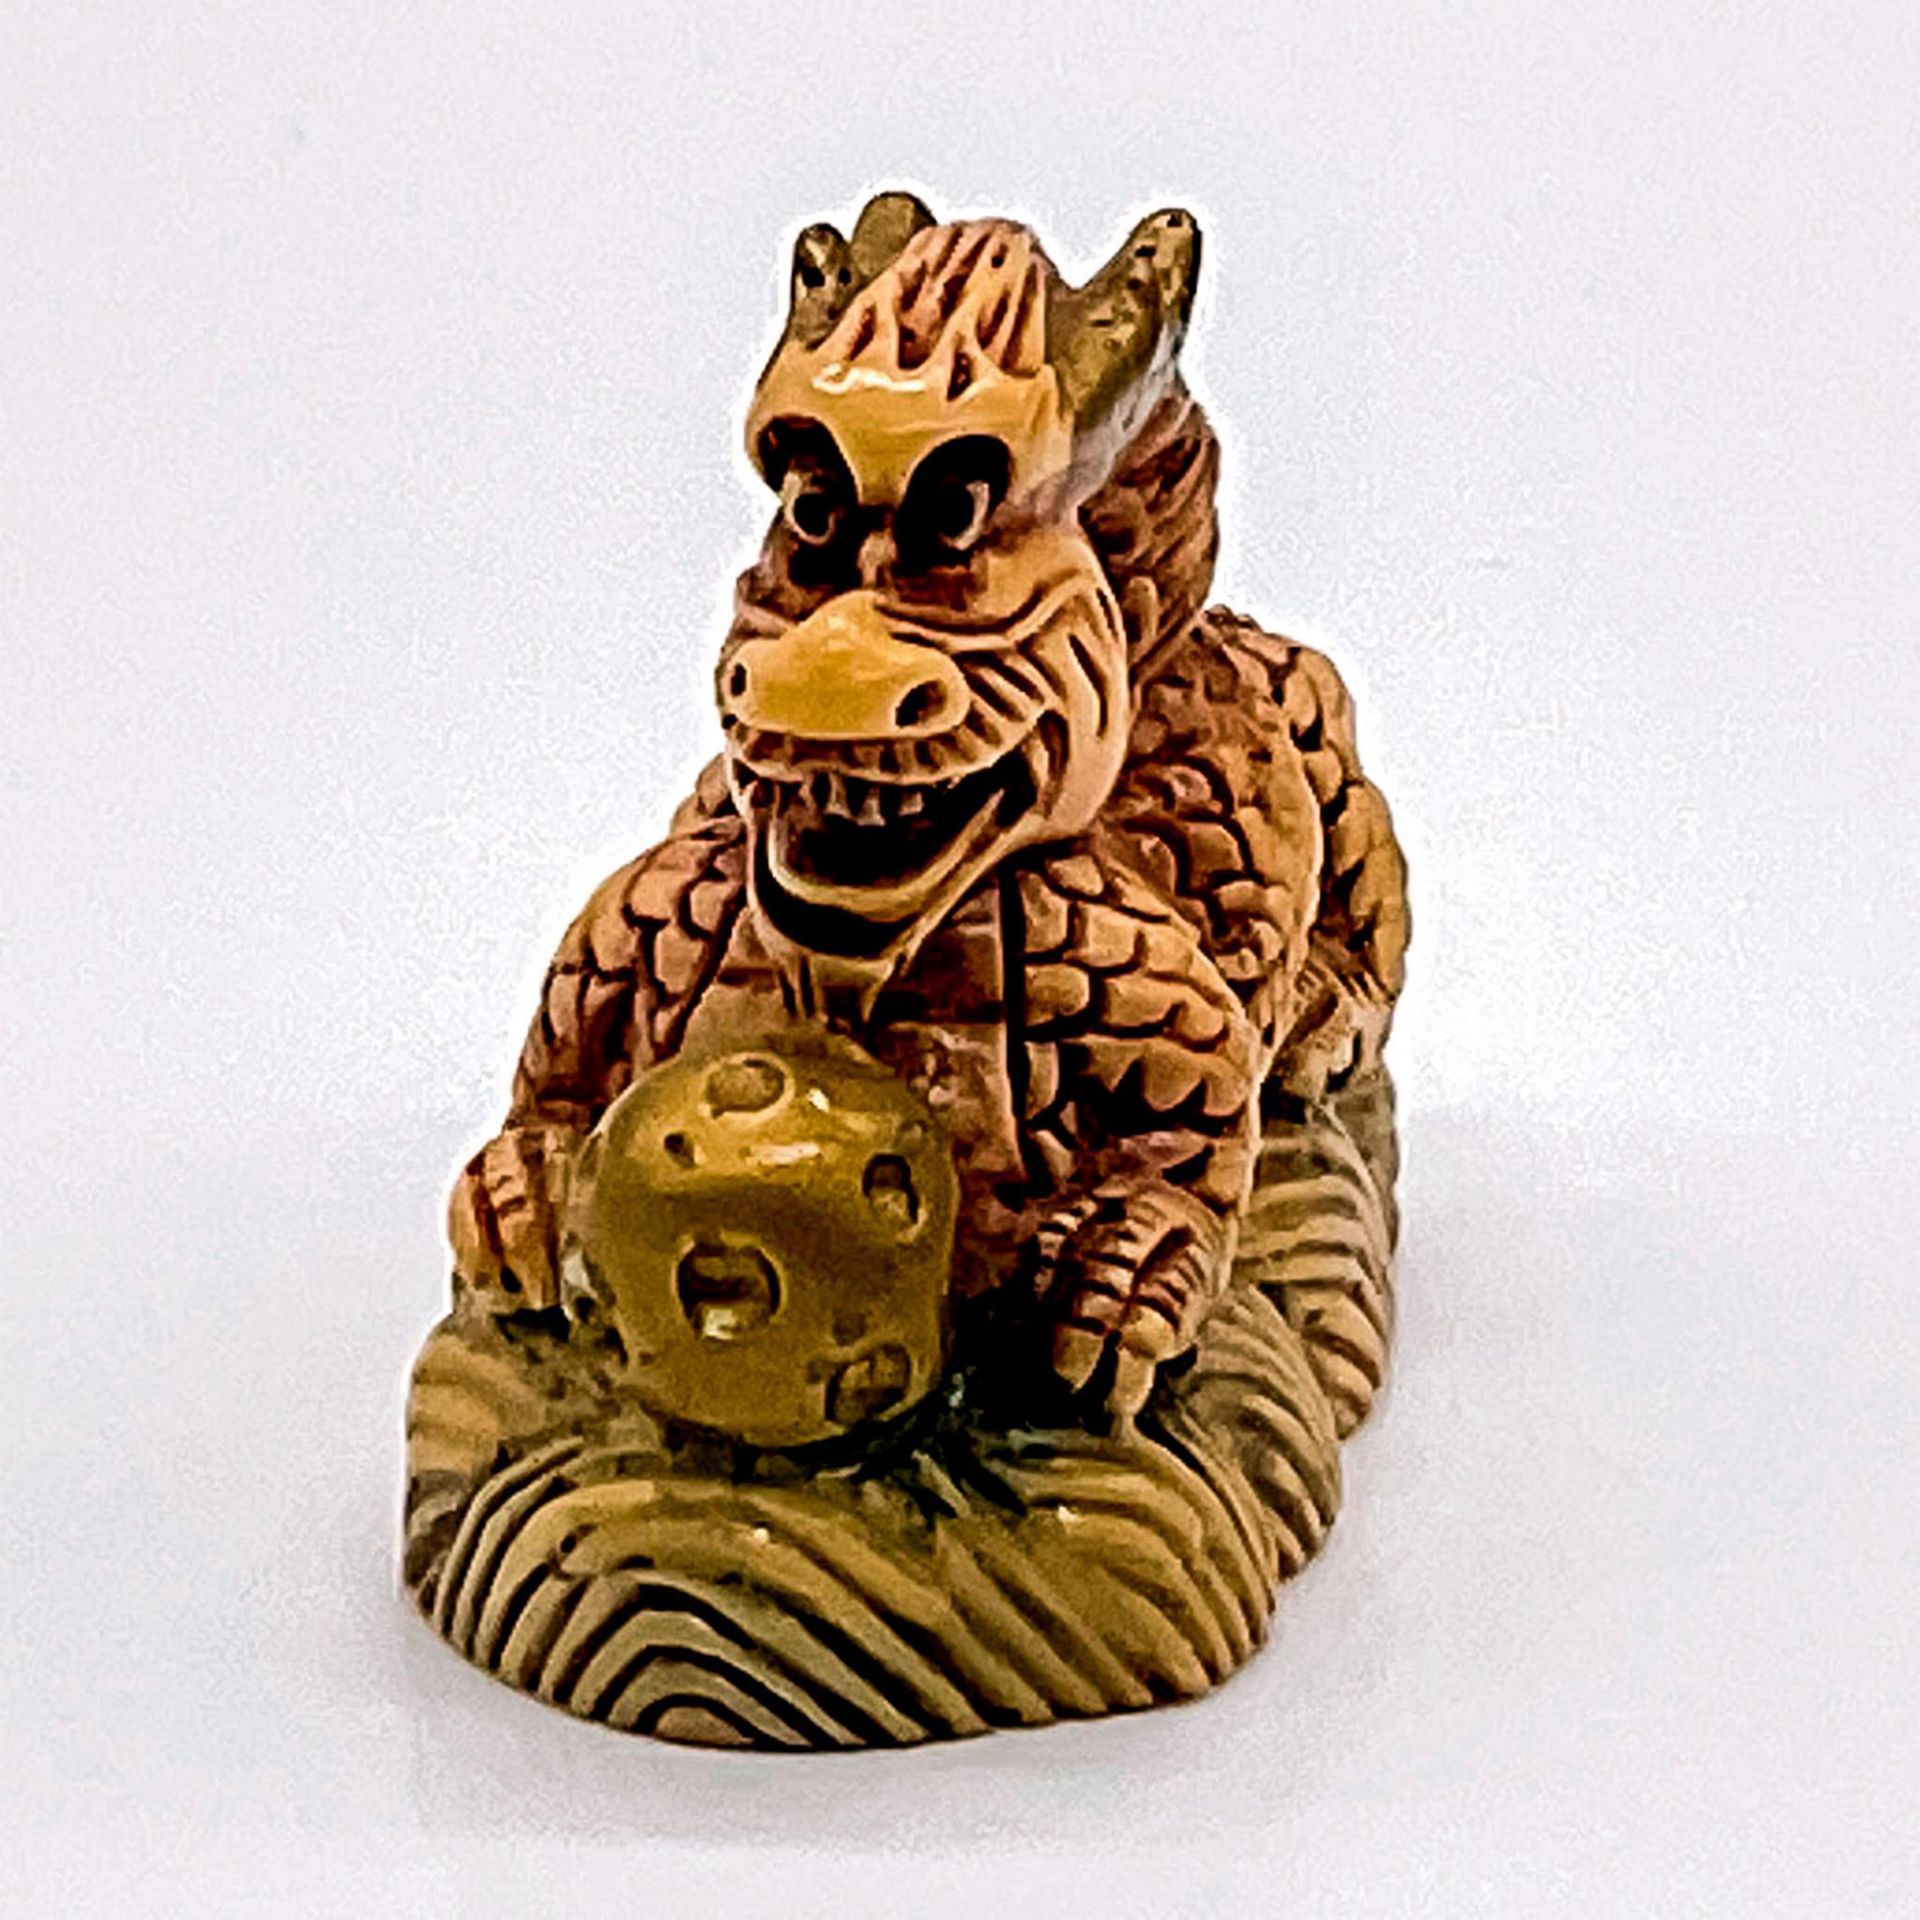 Chinese Inked Resin Dragon Figurine - Image 2 of 3